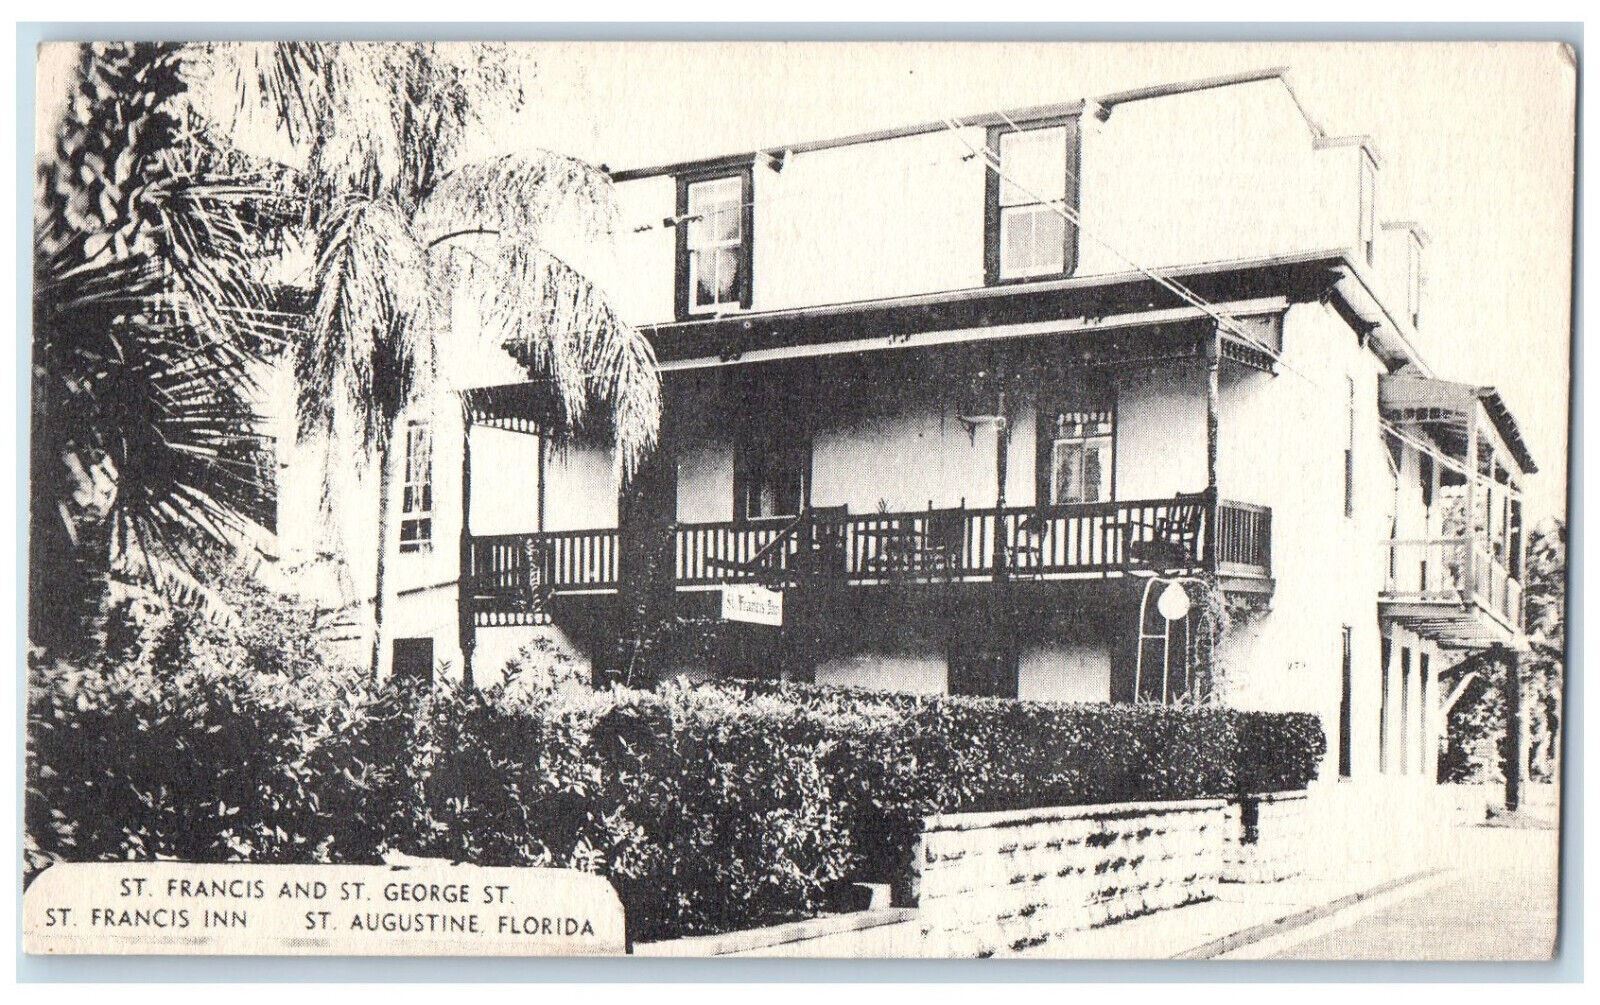 c1940's St. Francis and St. George St. St. Francis St. Augustine FL Postcard